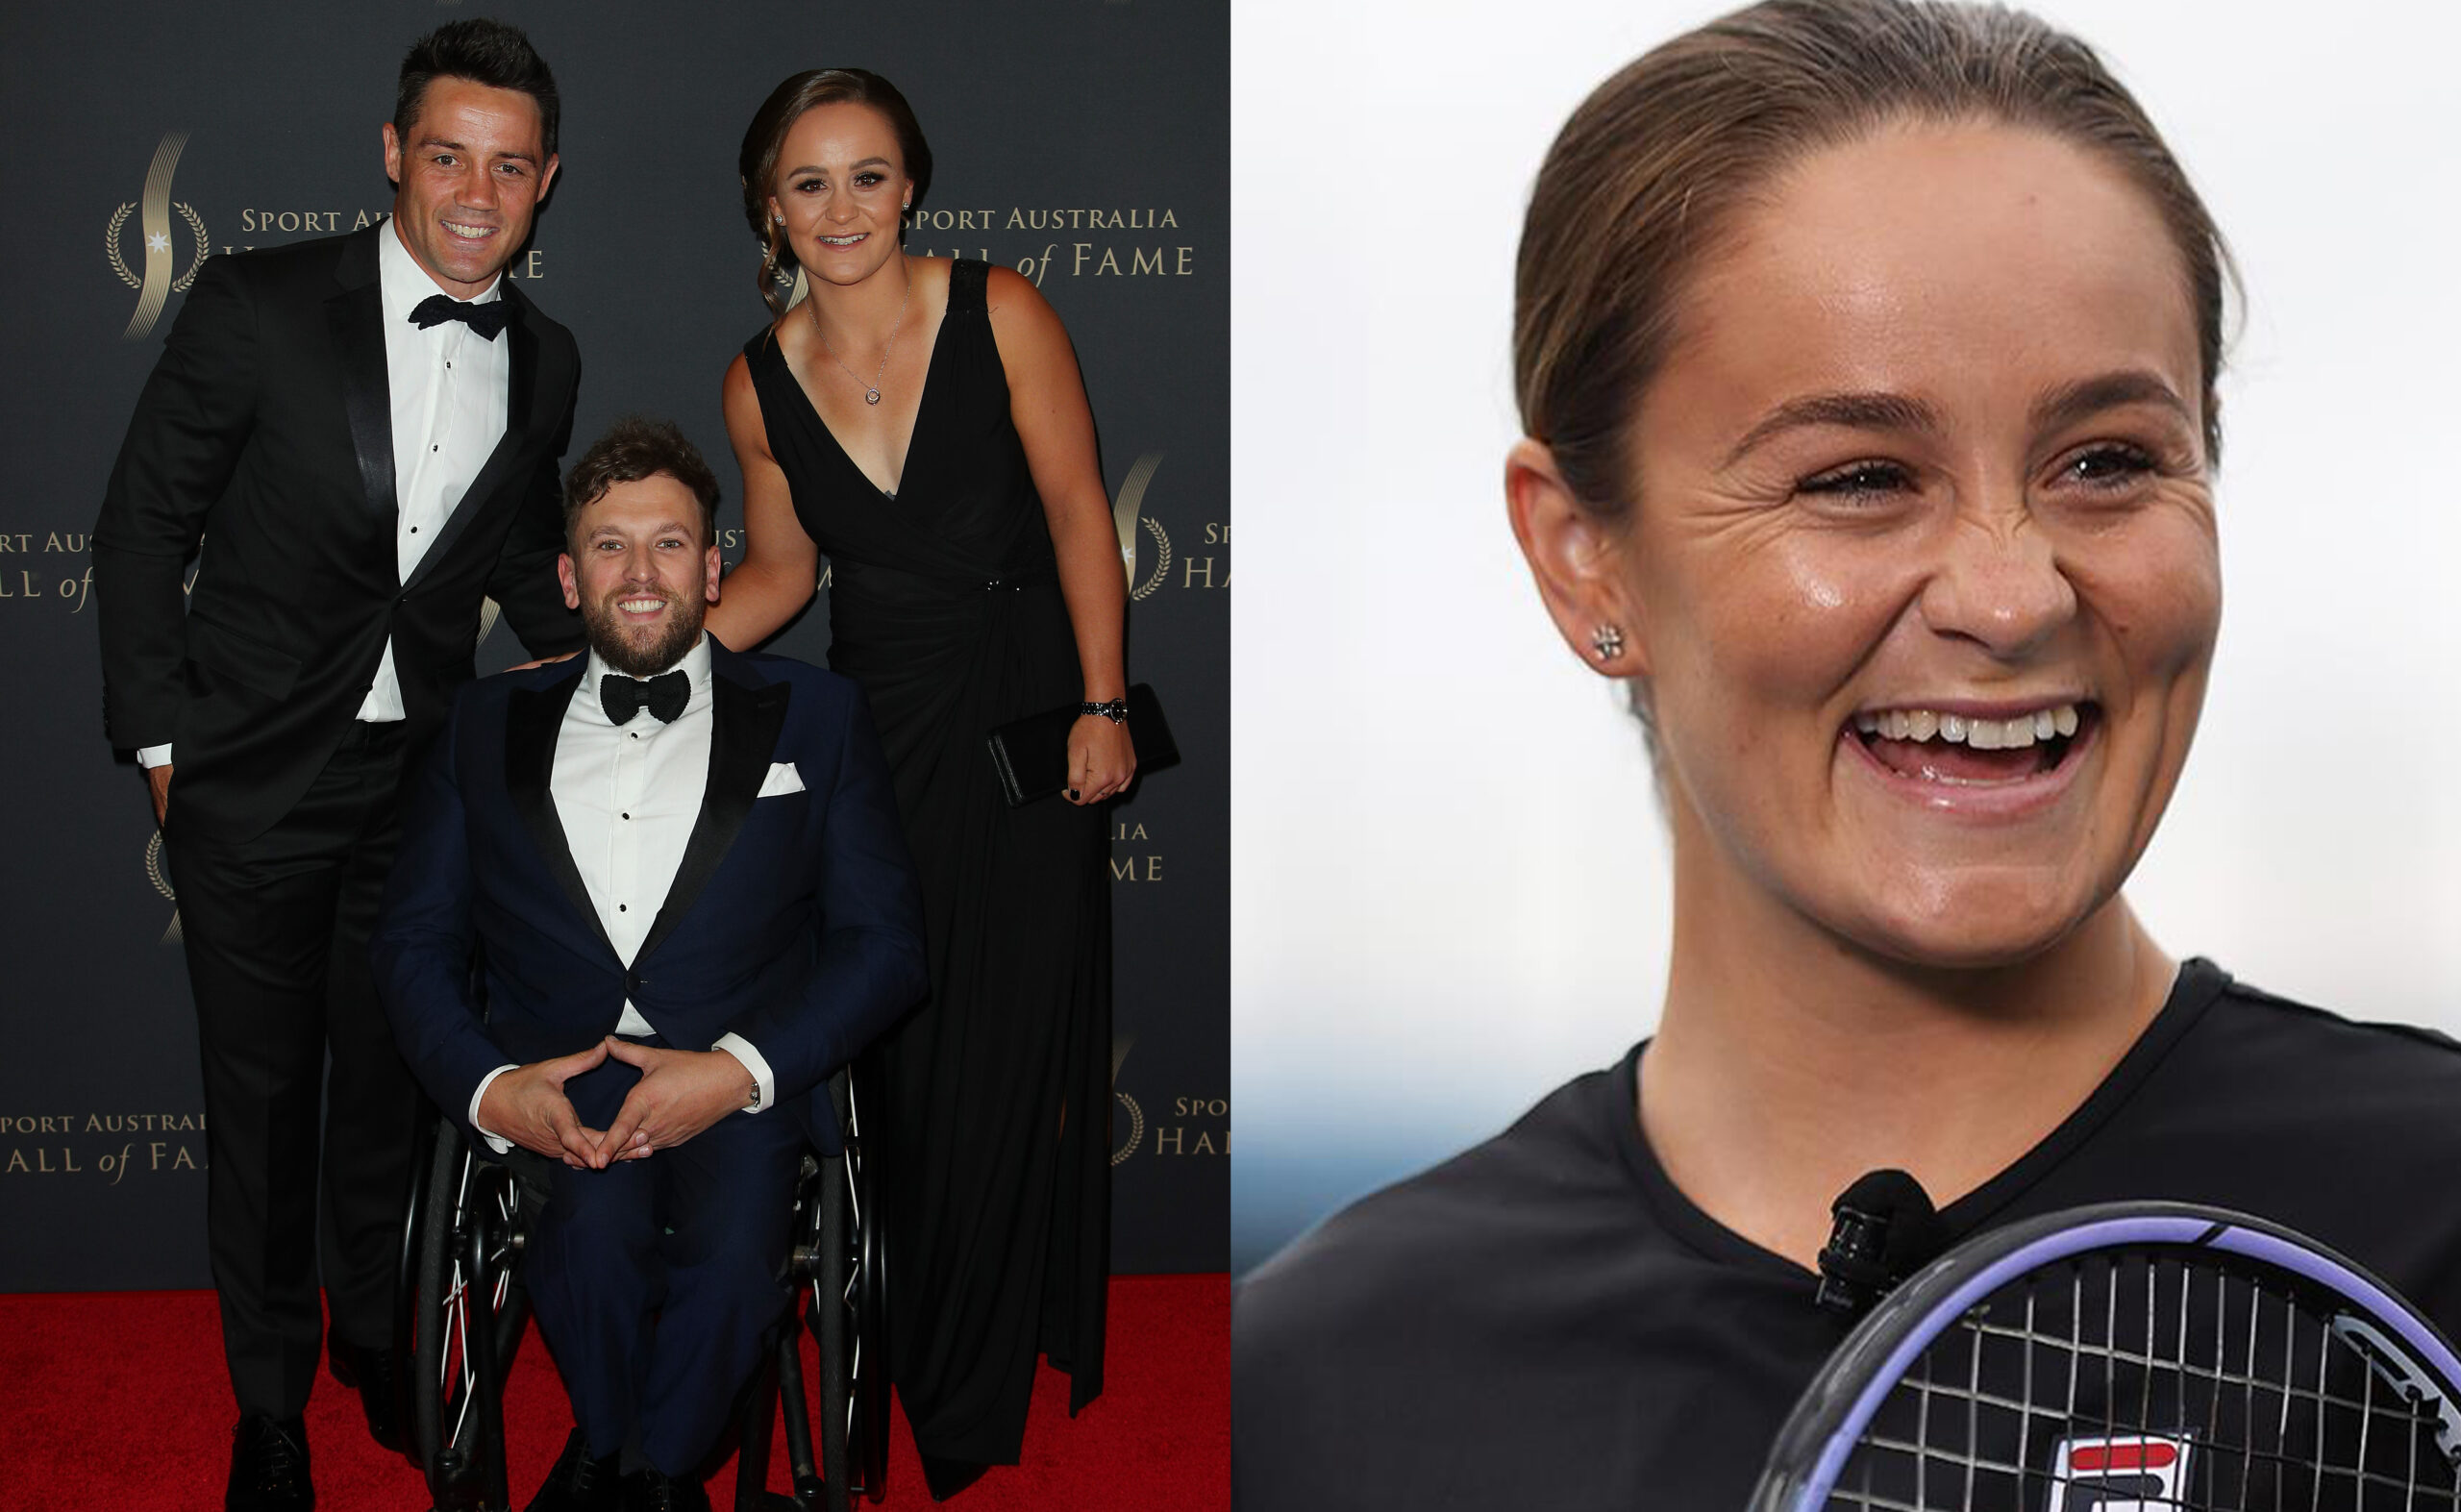 Hugh Jackman, Carrie Bickmore and Dannii Minogue lead the celebrities reacting to Ash Barty’s shock tennis retirement